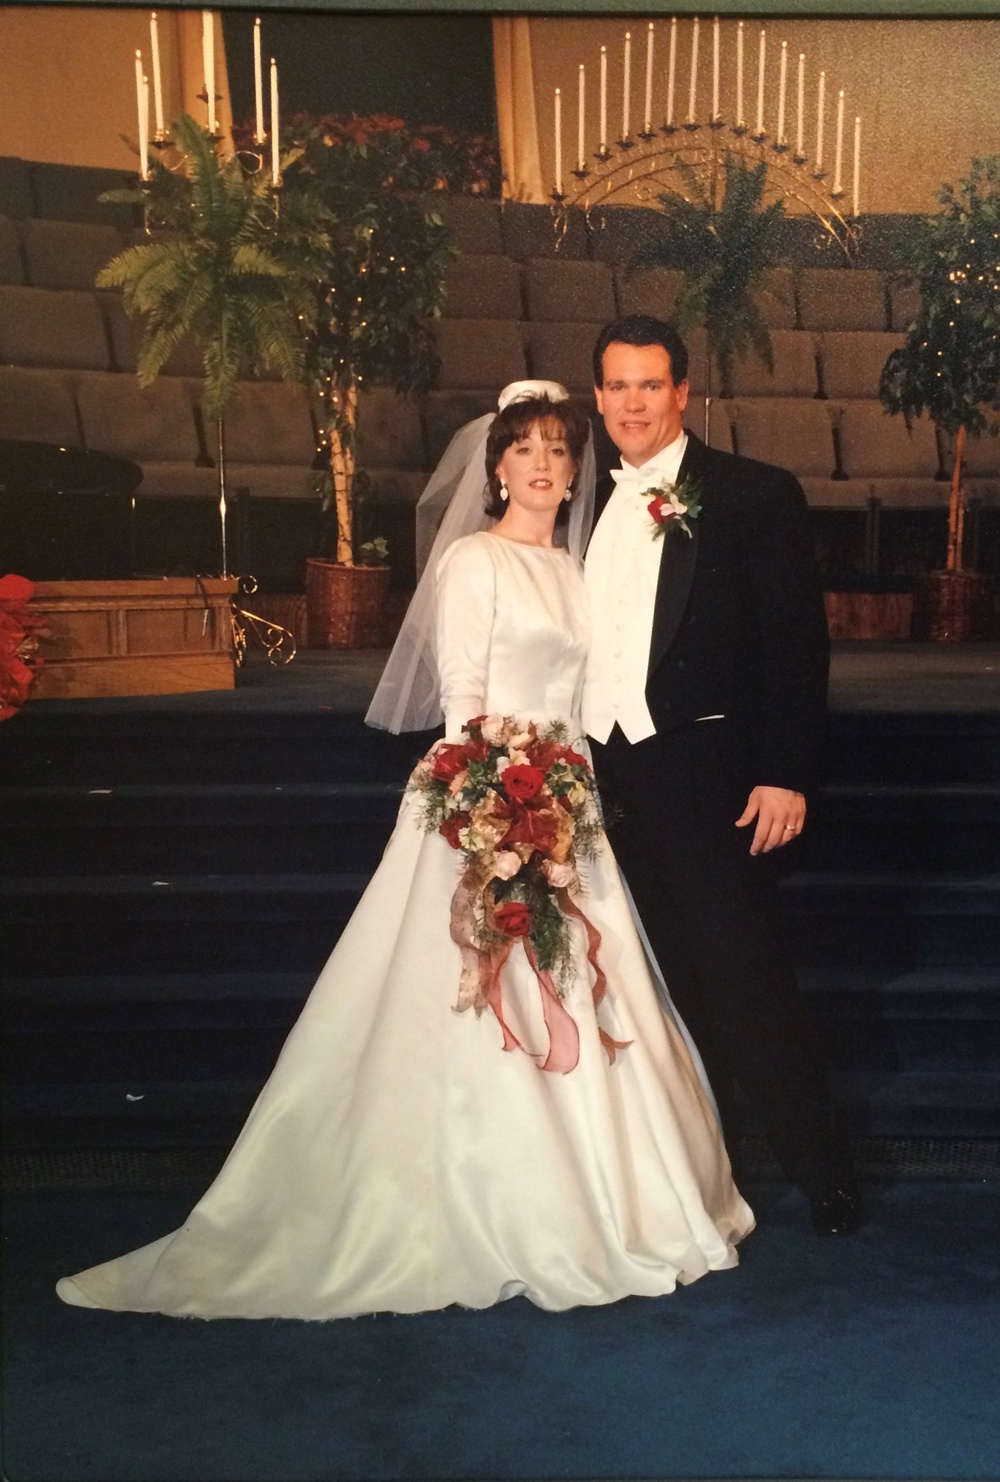 Leigh and Chaplain Scott Ingram at their wedding in Cleveland, Tennessee in December 1999. (Courtesy photo from Leigh Ingram)